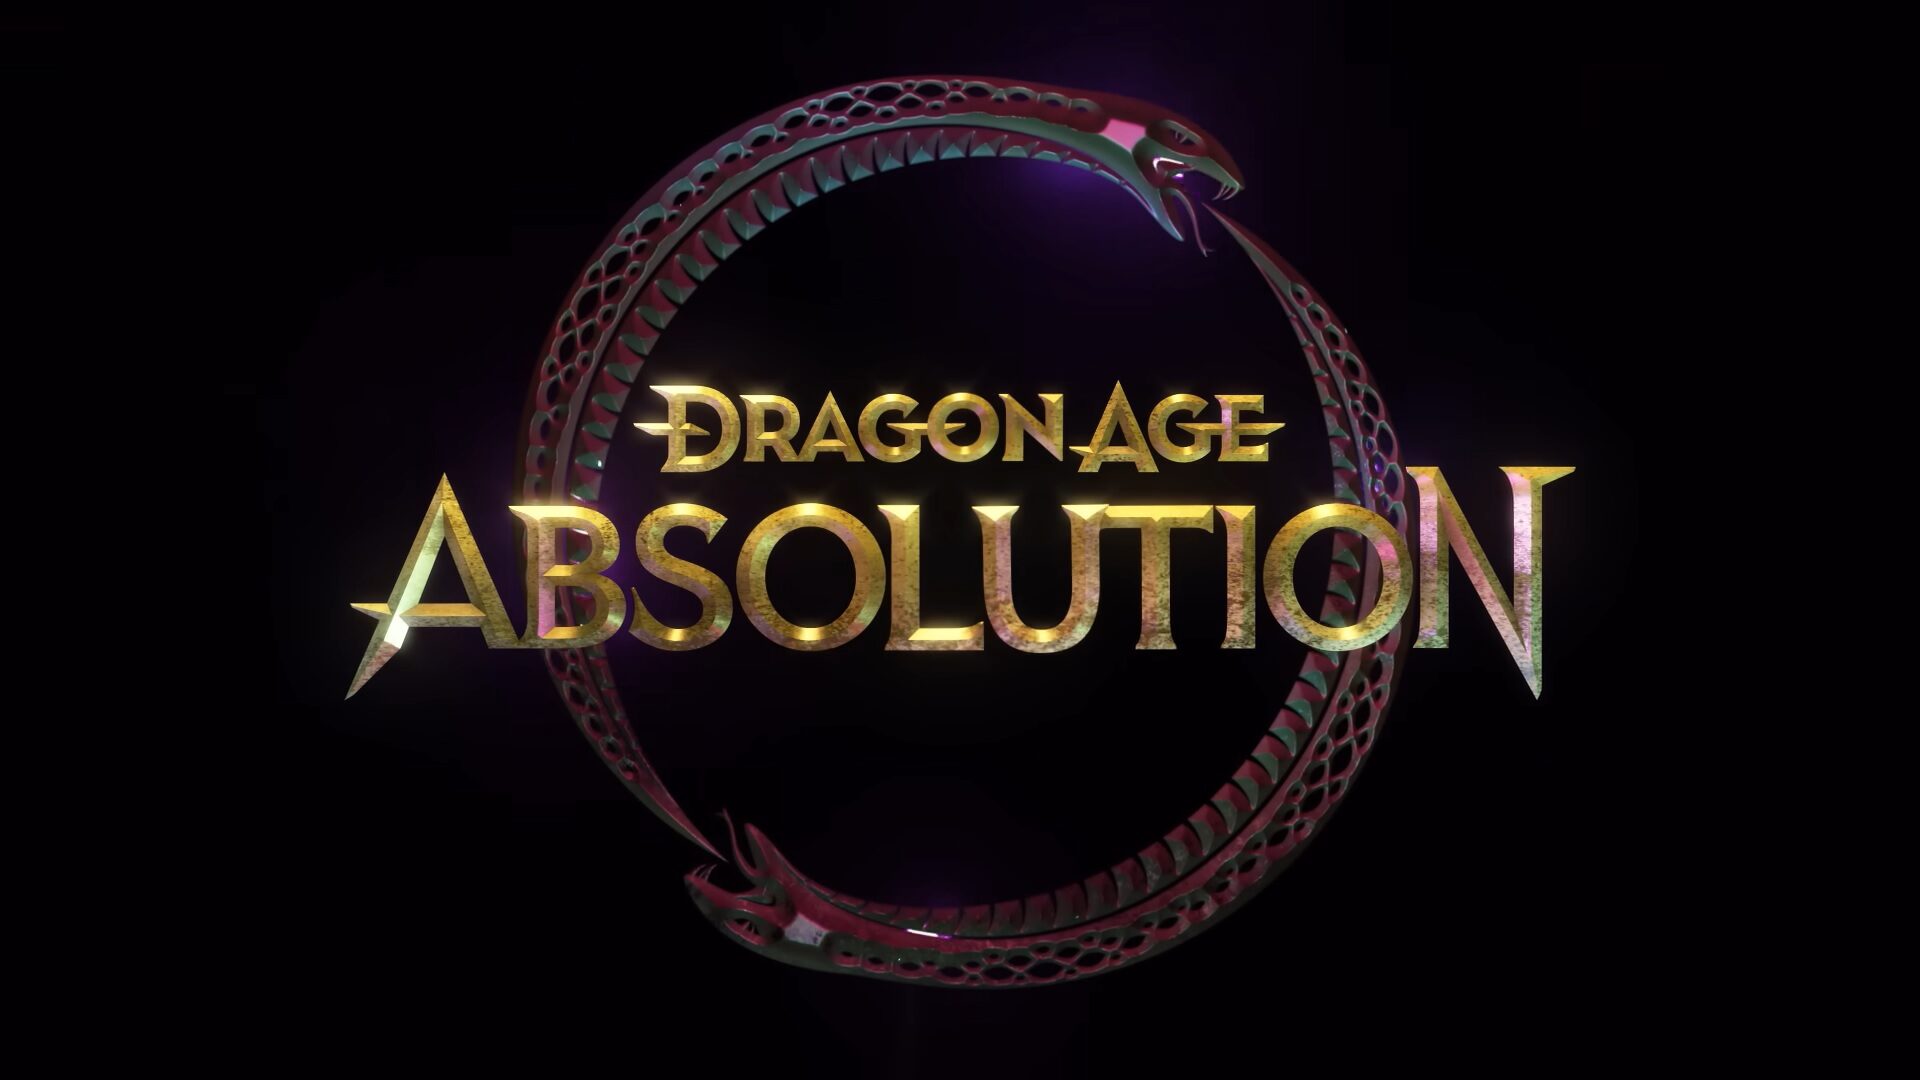 Dragon Age Absolution on Netflix